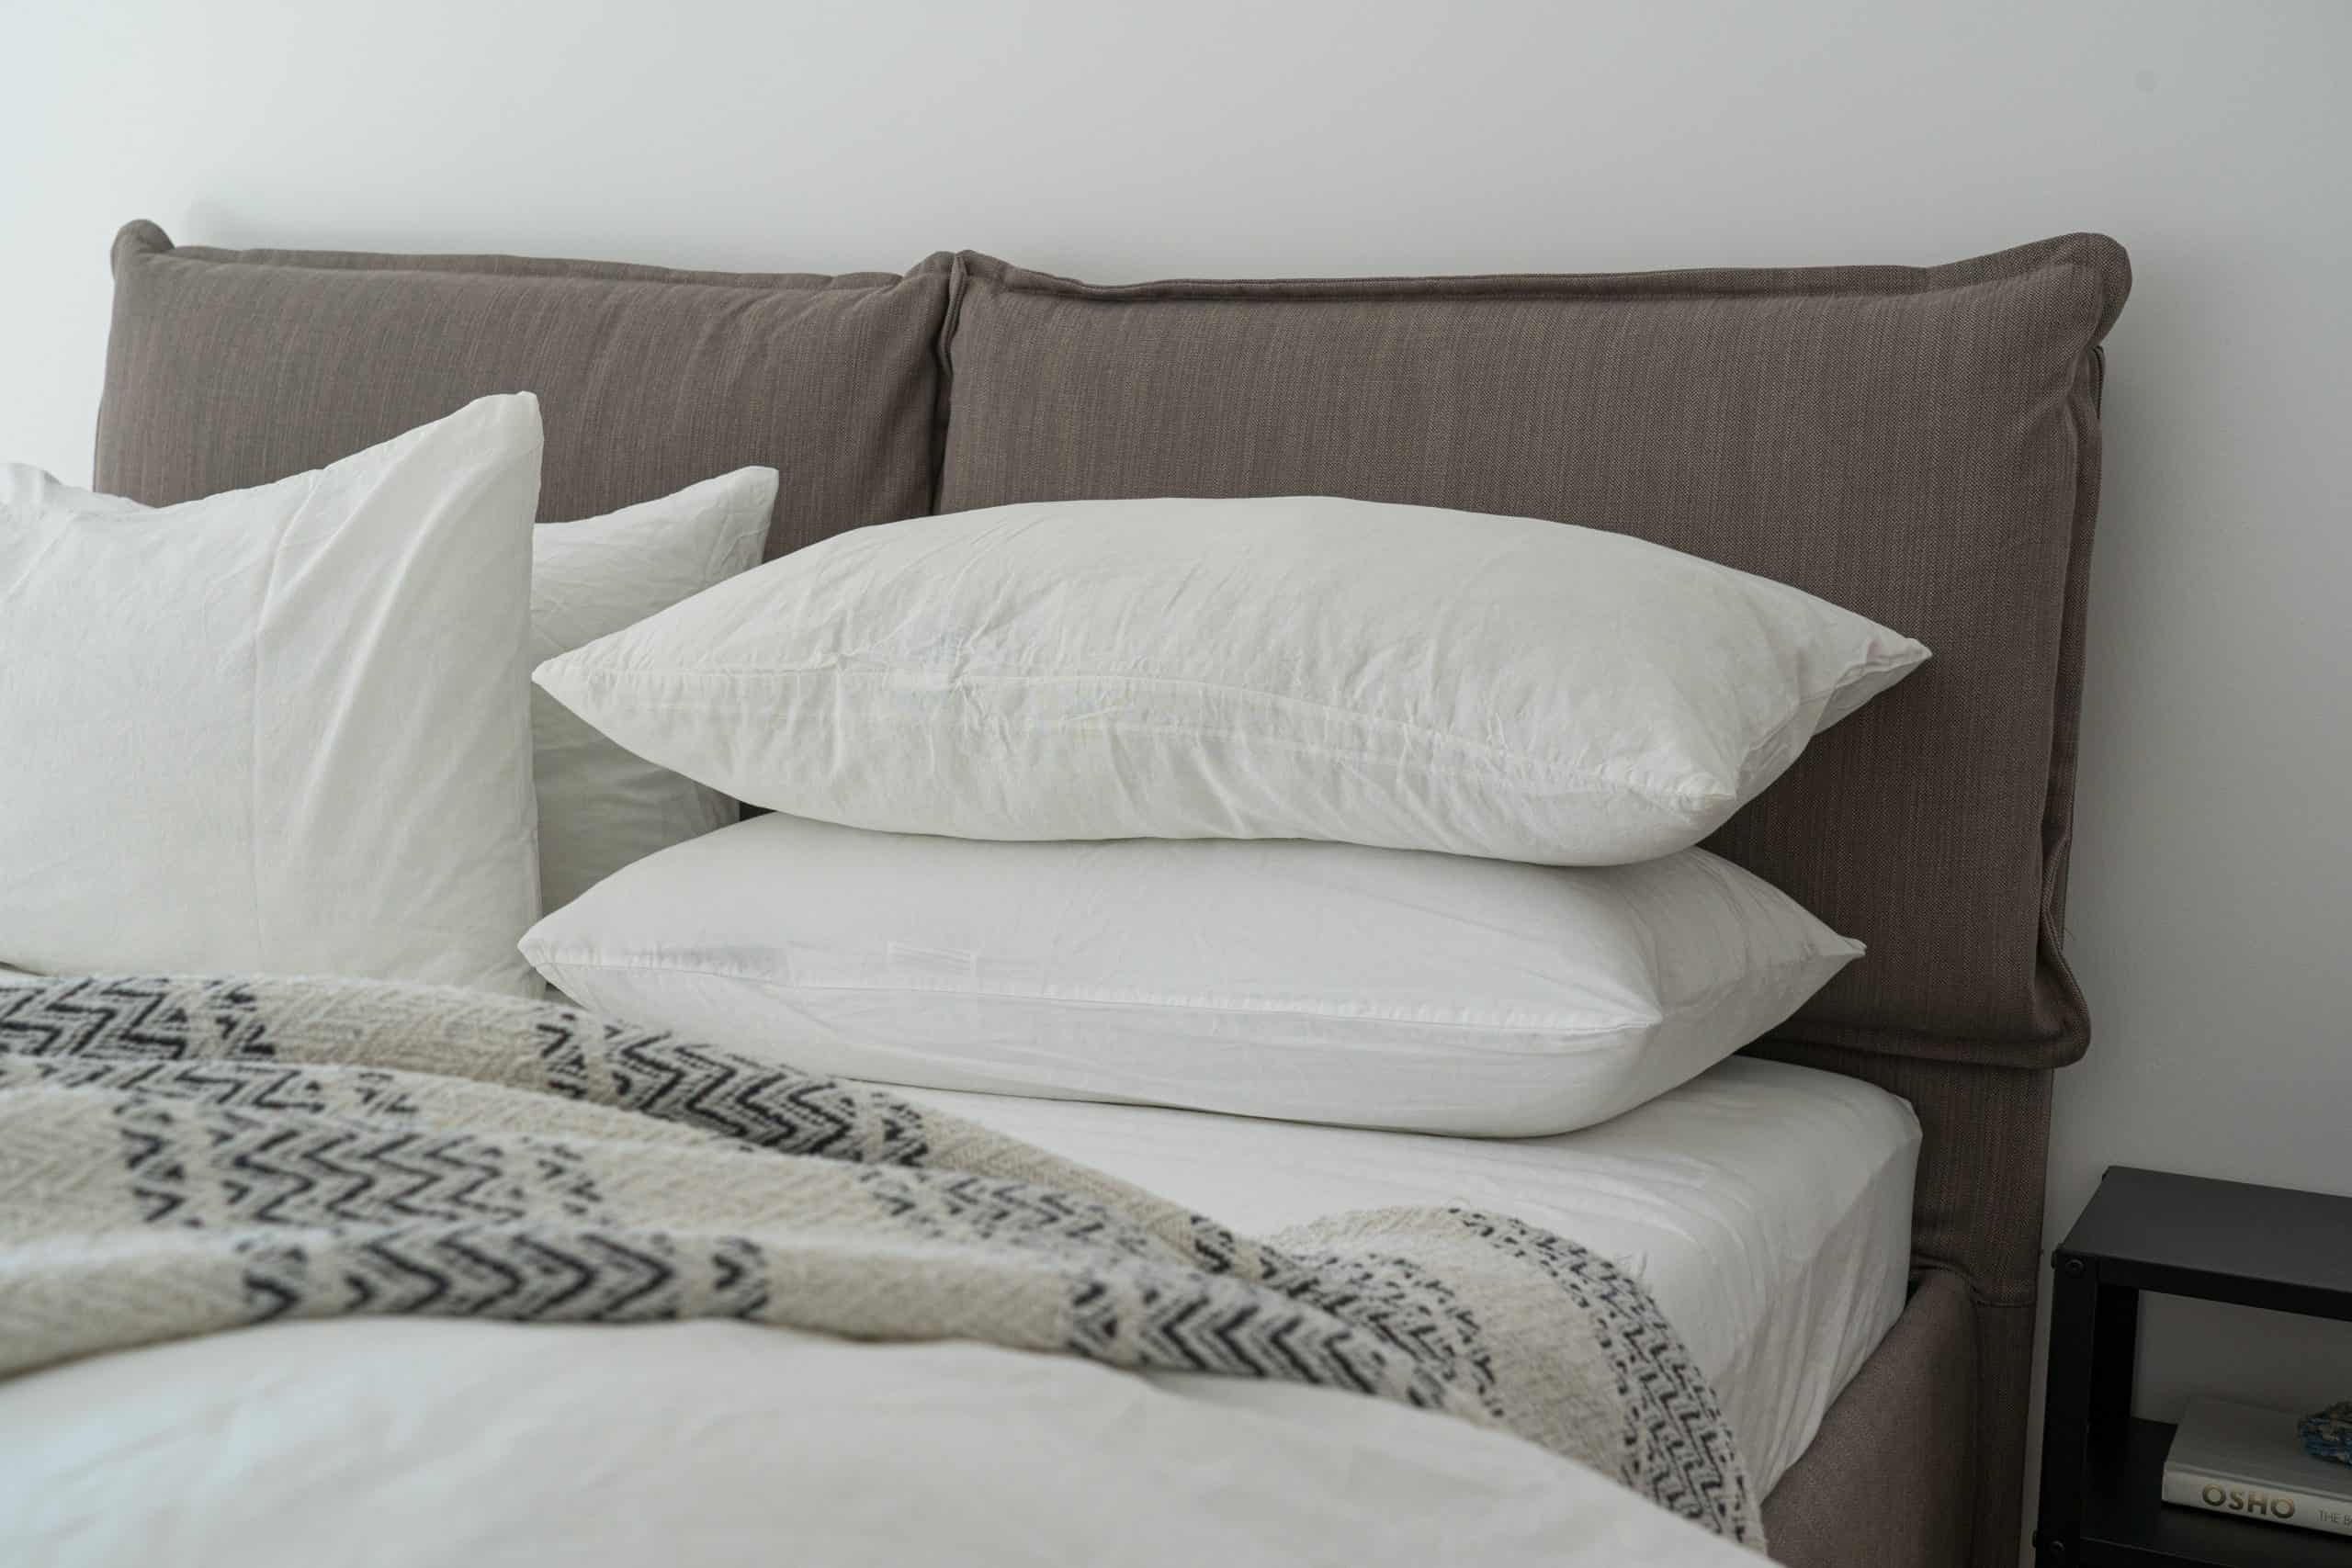 The Ultimate Guide to Choosing the Perfect Pillows for Your Bedroom